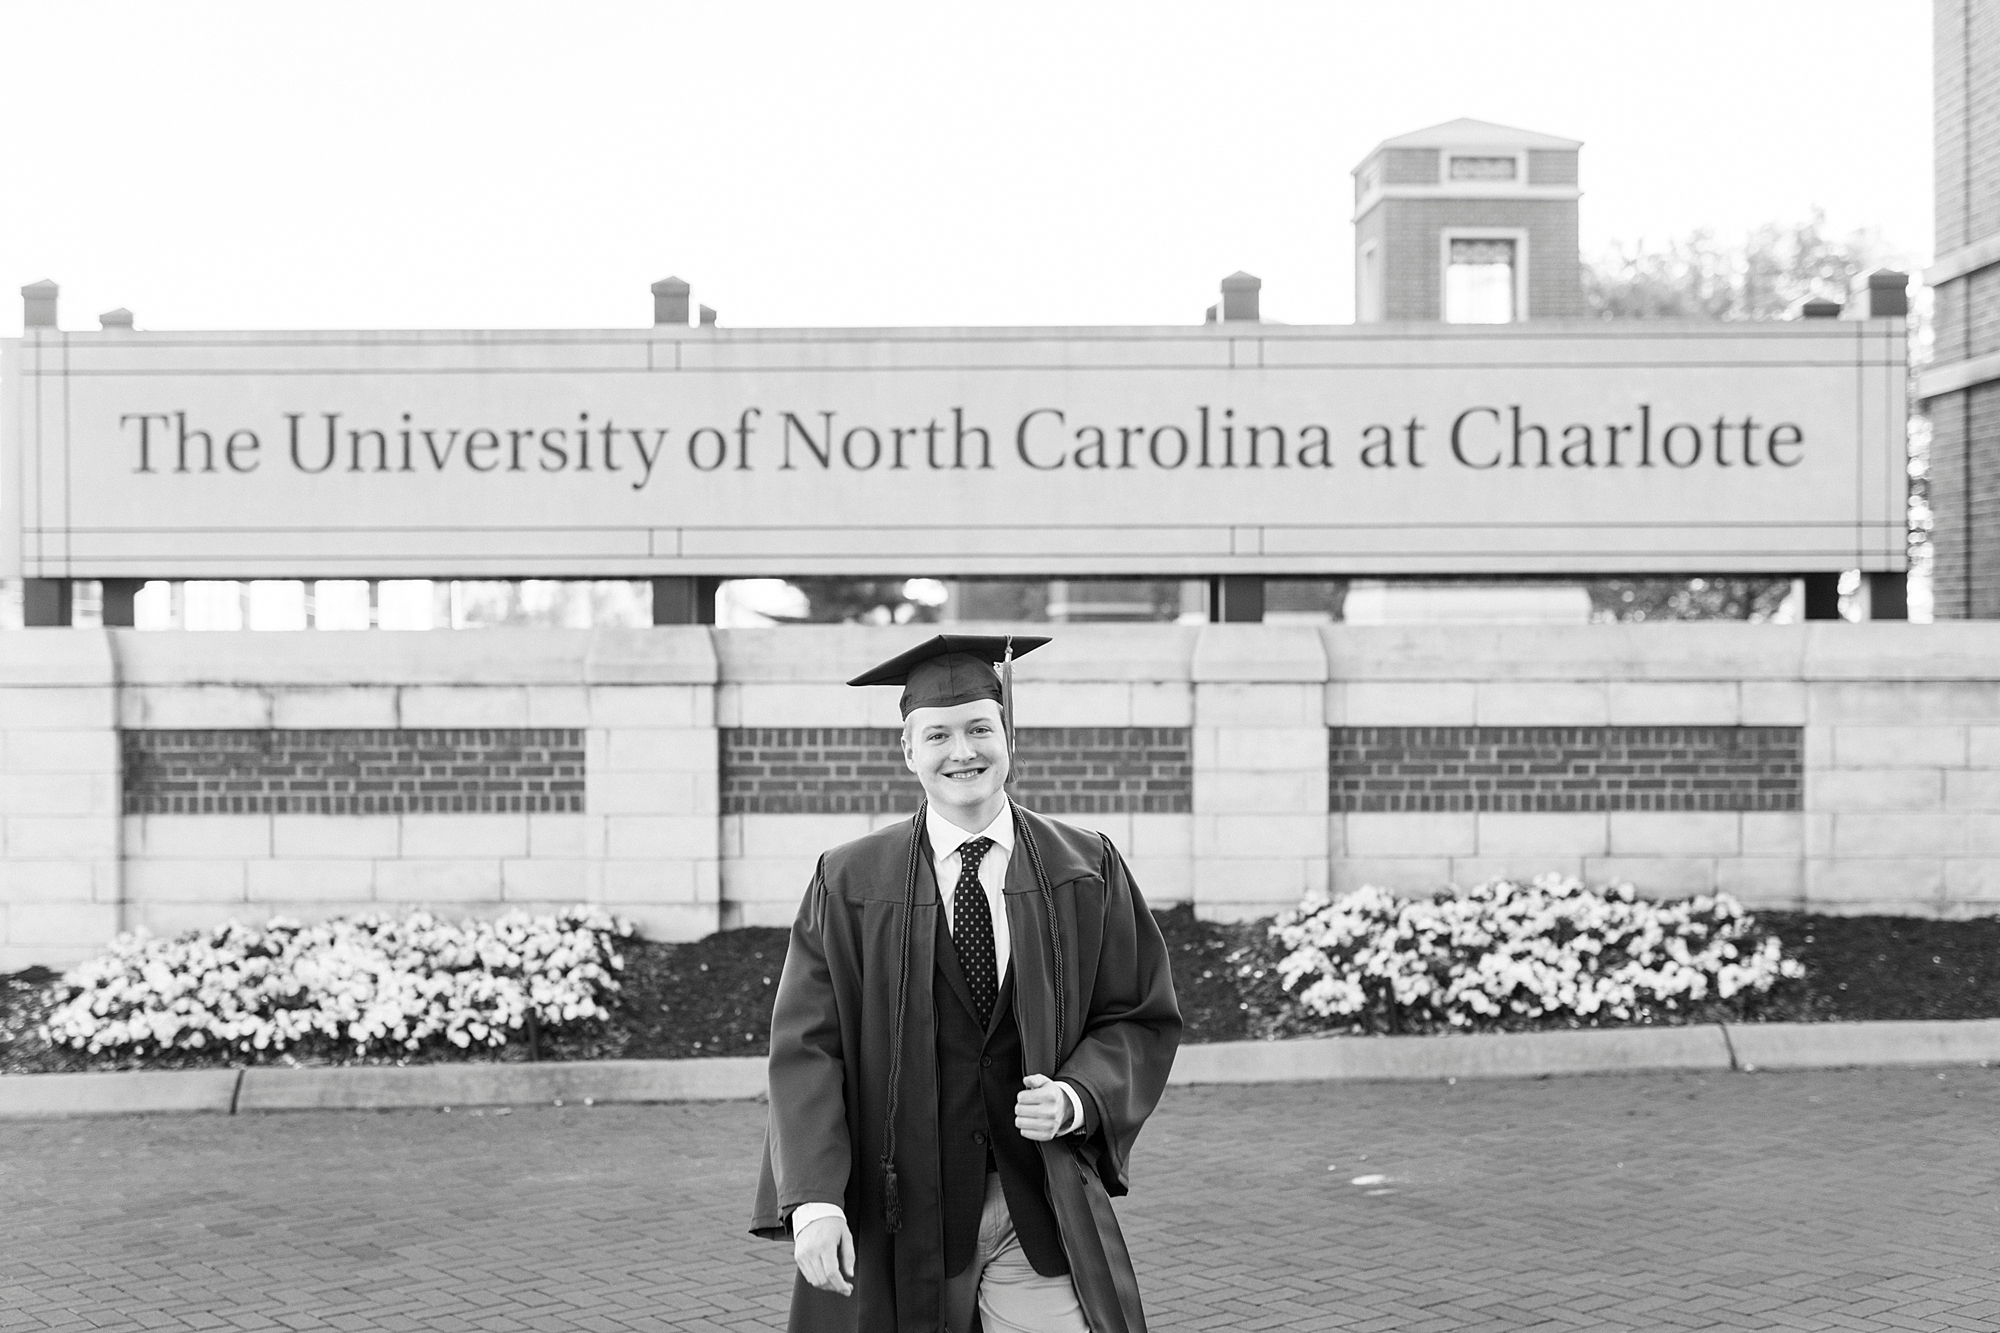 senior stands in cap and gown by University of North Carolina at Charlotte sign